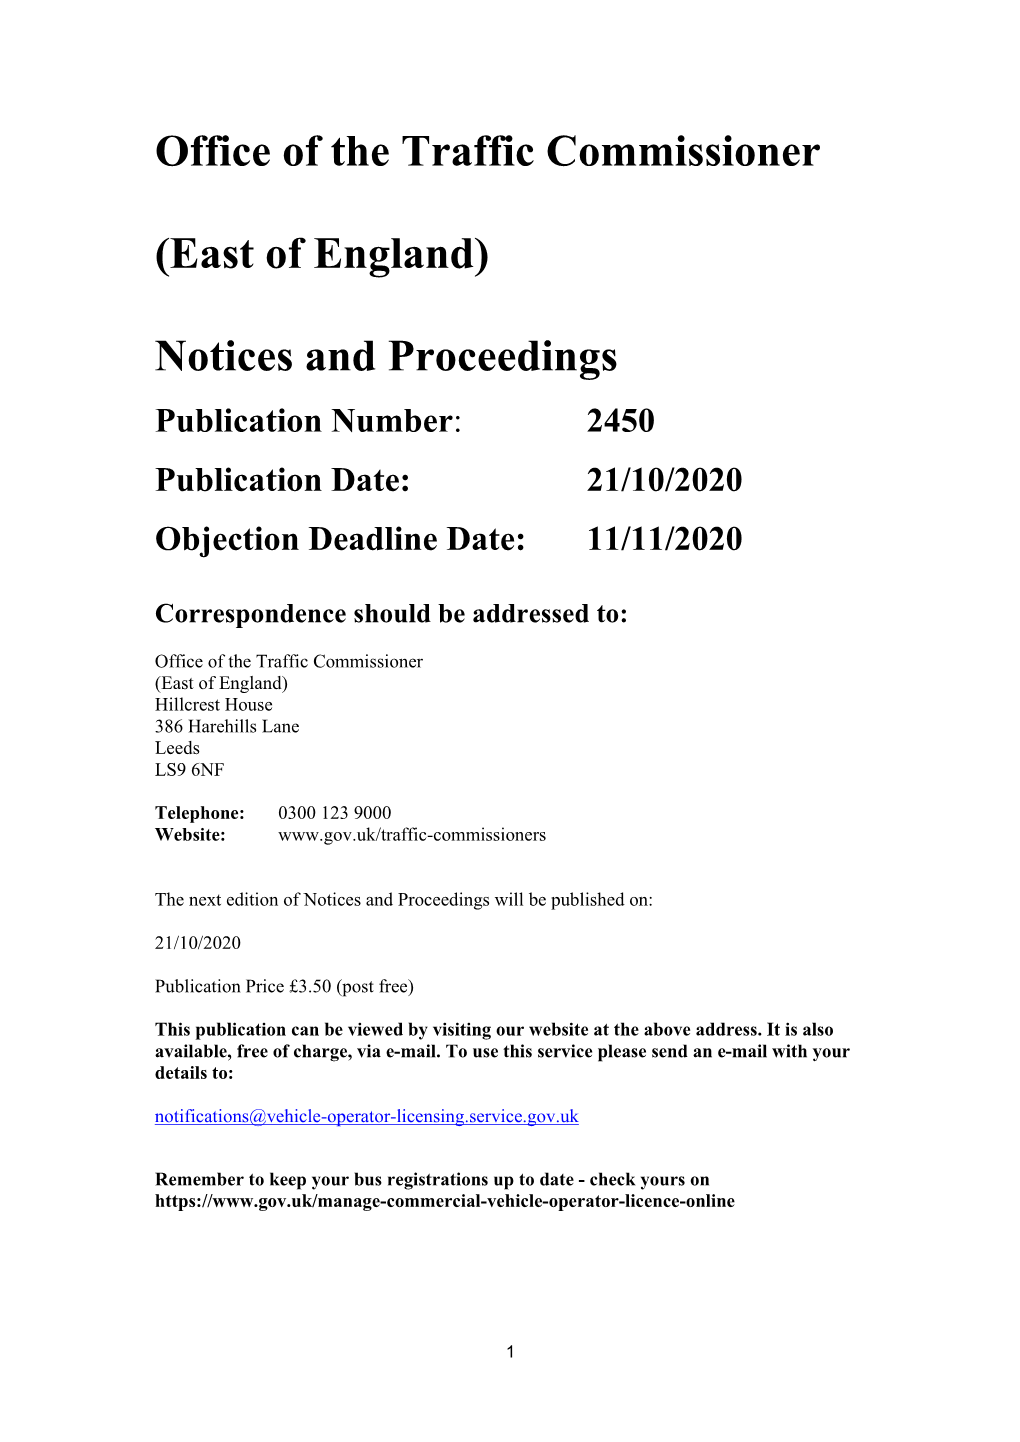 Notices and Proceedings for the East of England 2450